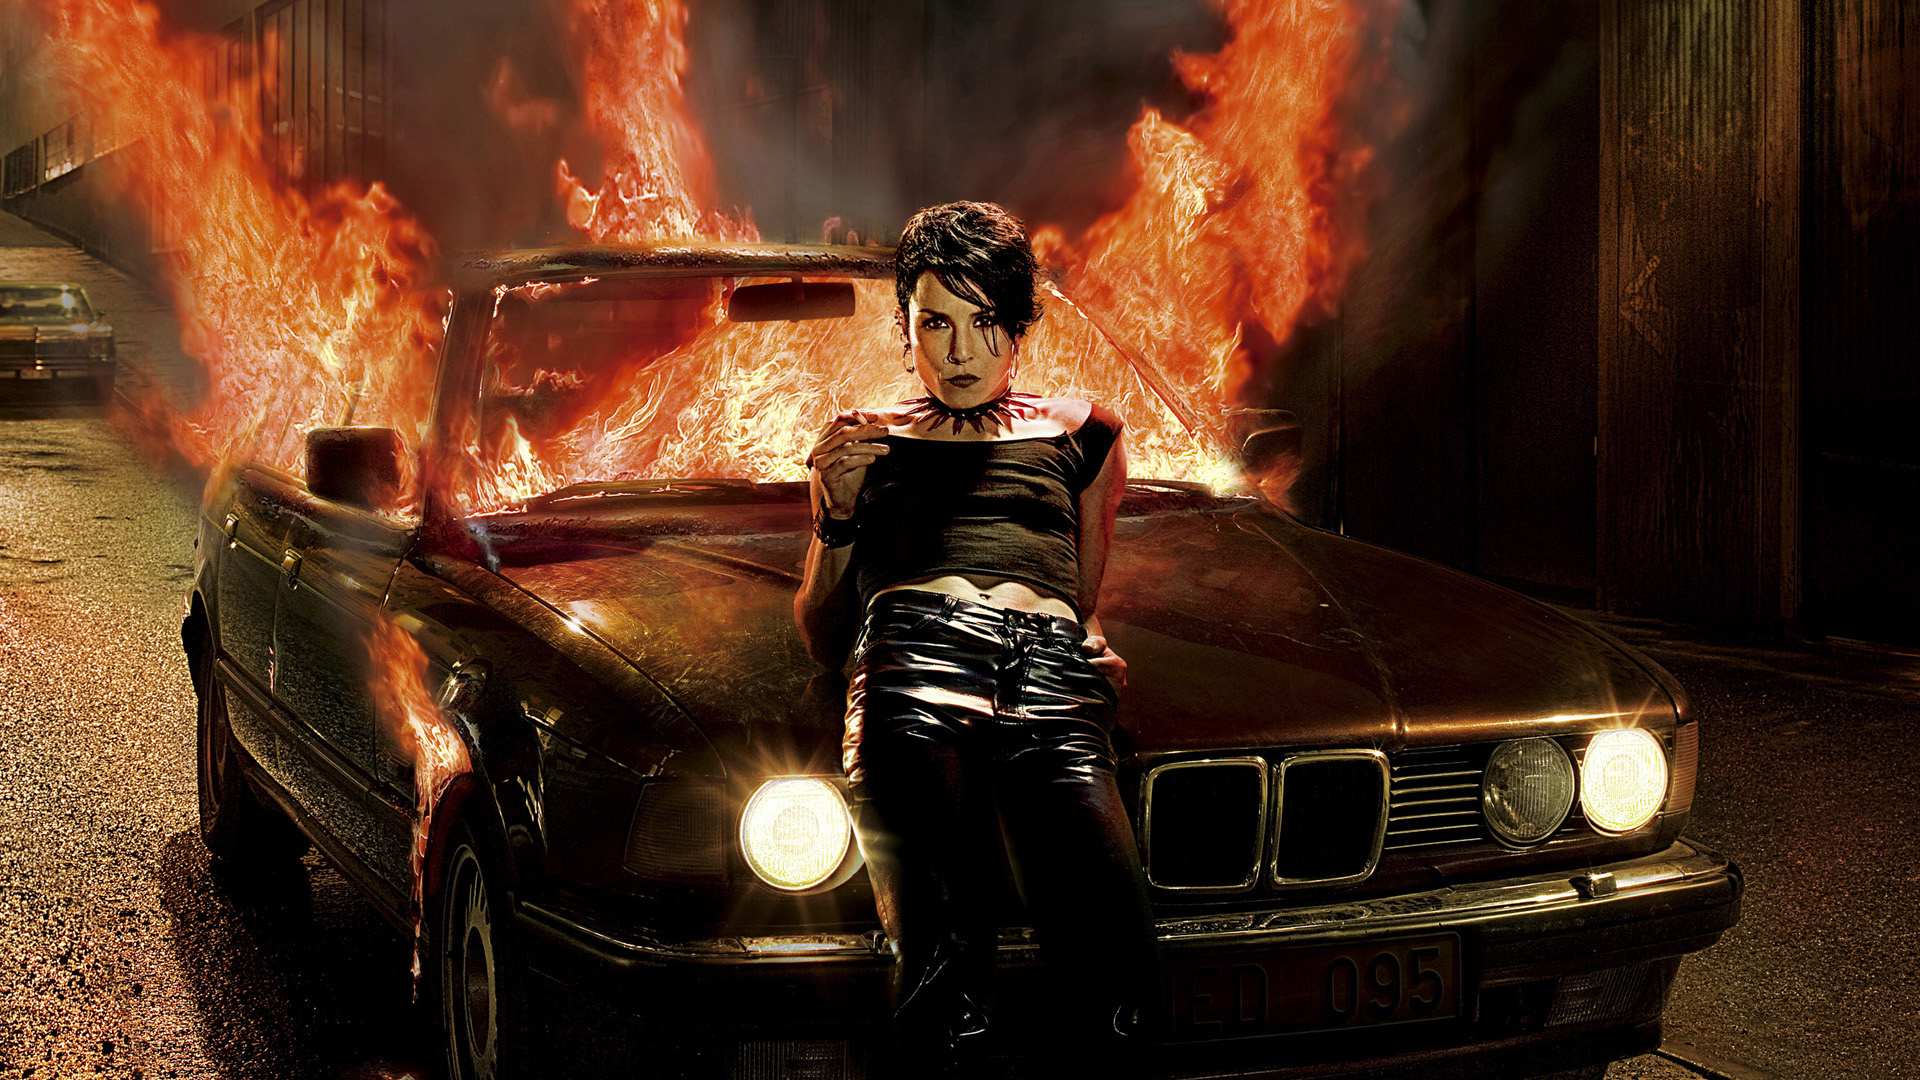 Noomi Rapace, The girl who played with fire, Fiery intensity, Compelling performance, 1920x1080 Full HD Desktop